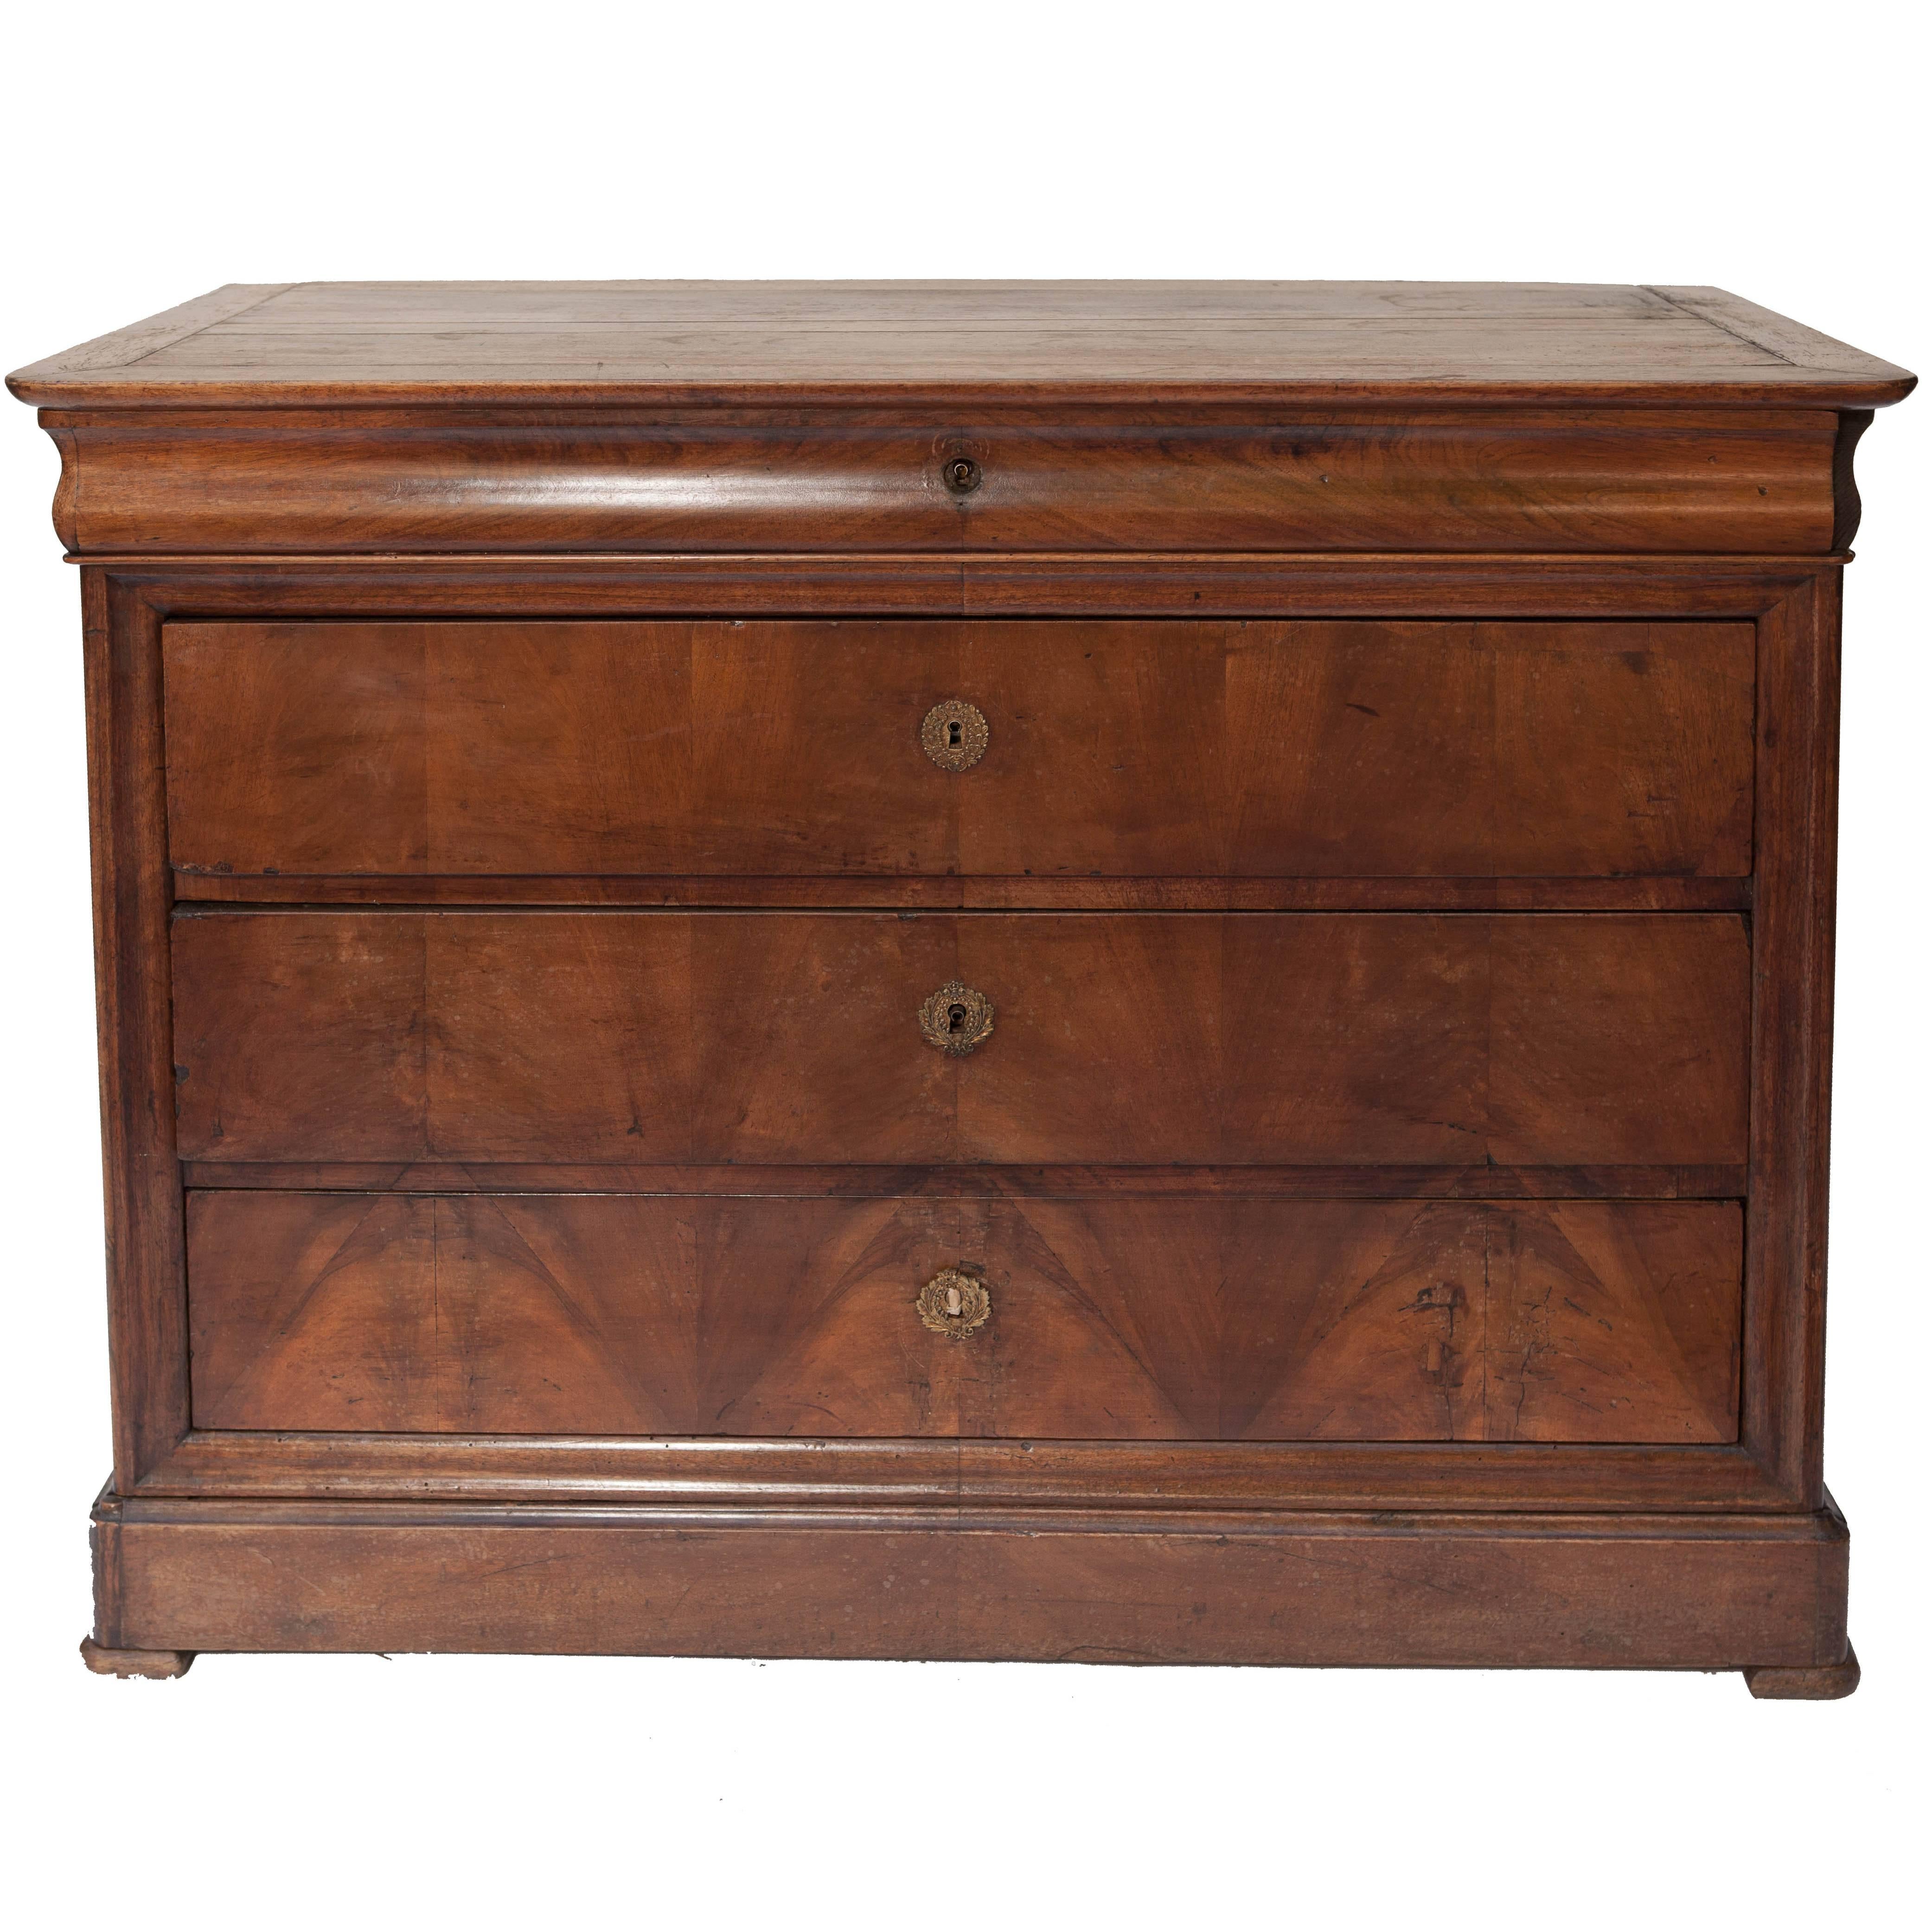 French Louis-Philippe Style Walnut Commode with Drawers and Pull-Out Desk